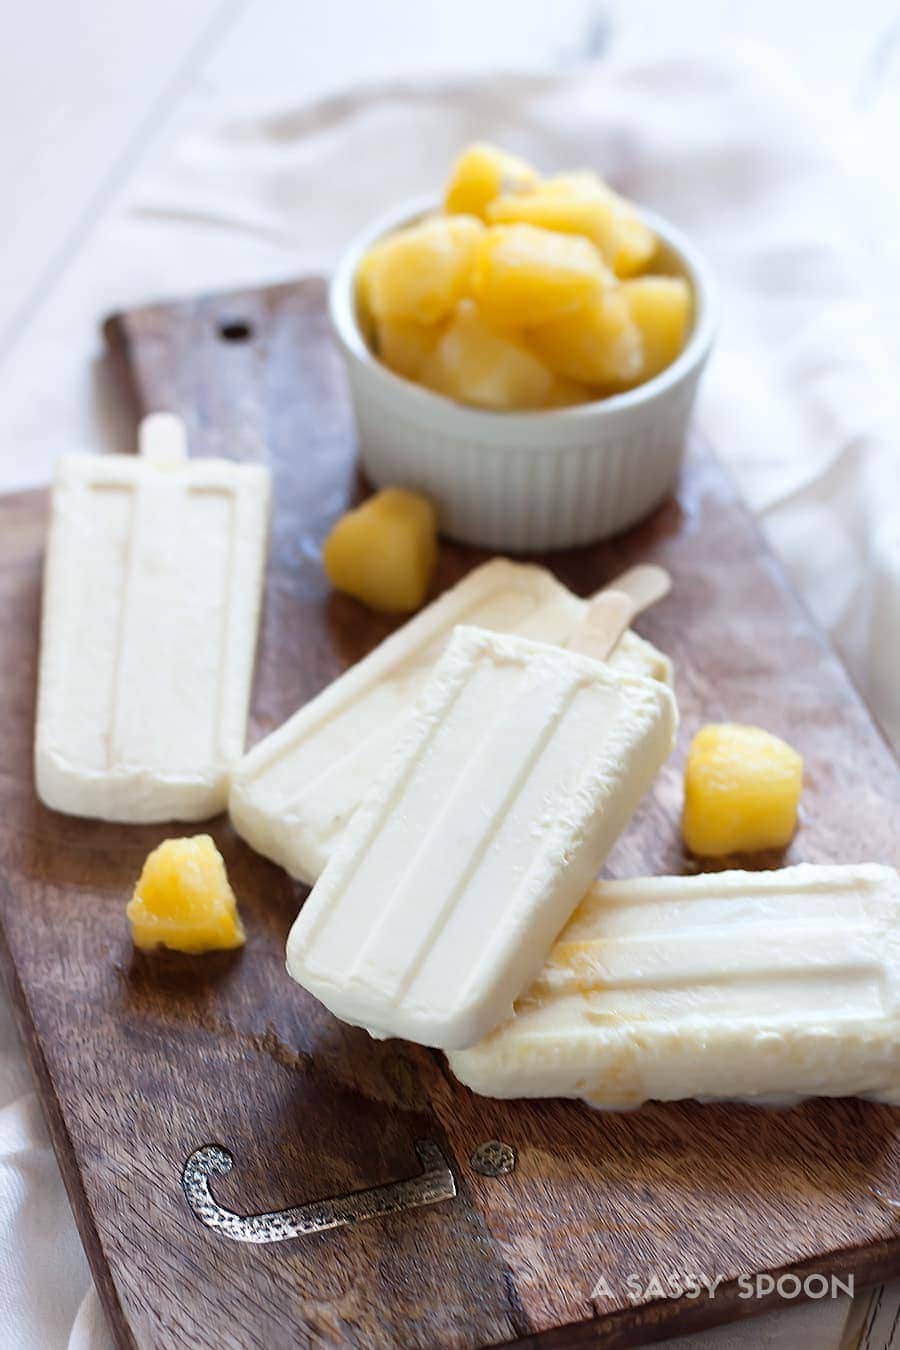 Pretend like it's Summer all year long with these easy to make creamy piña colada popsicles made with just 5 ingredients!